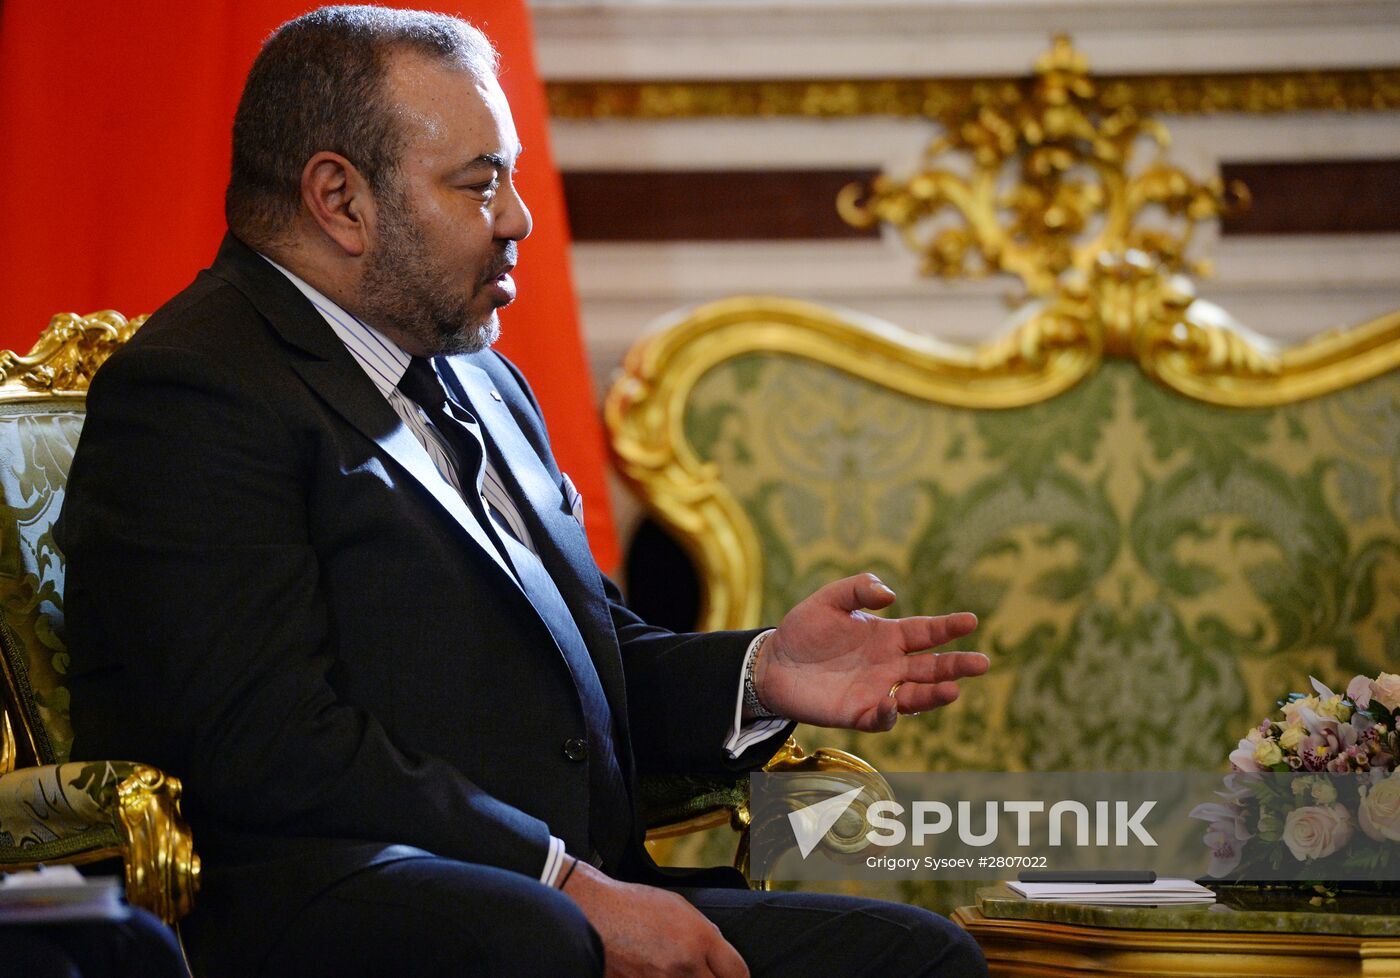 Russian President Vladimir Putin meets with King Mohammed VI of Morocco